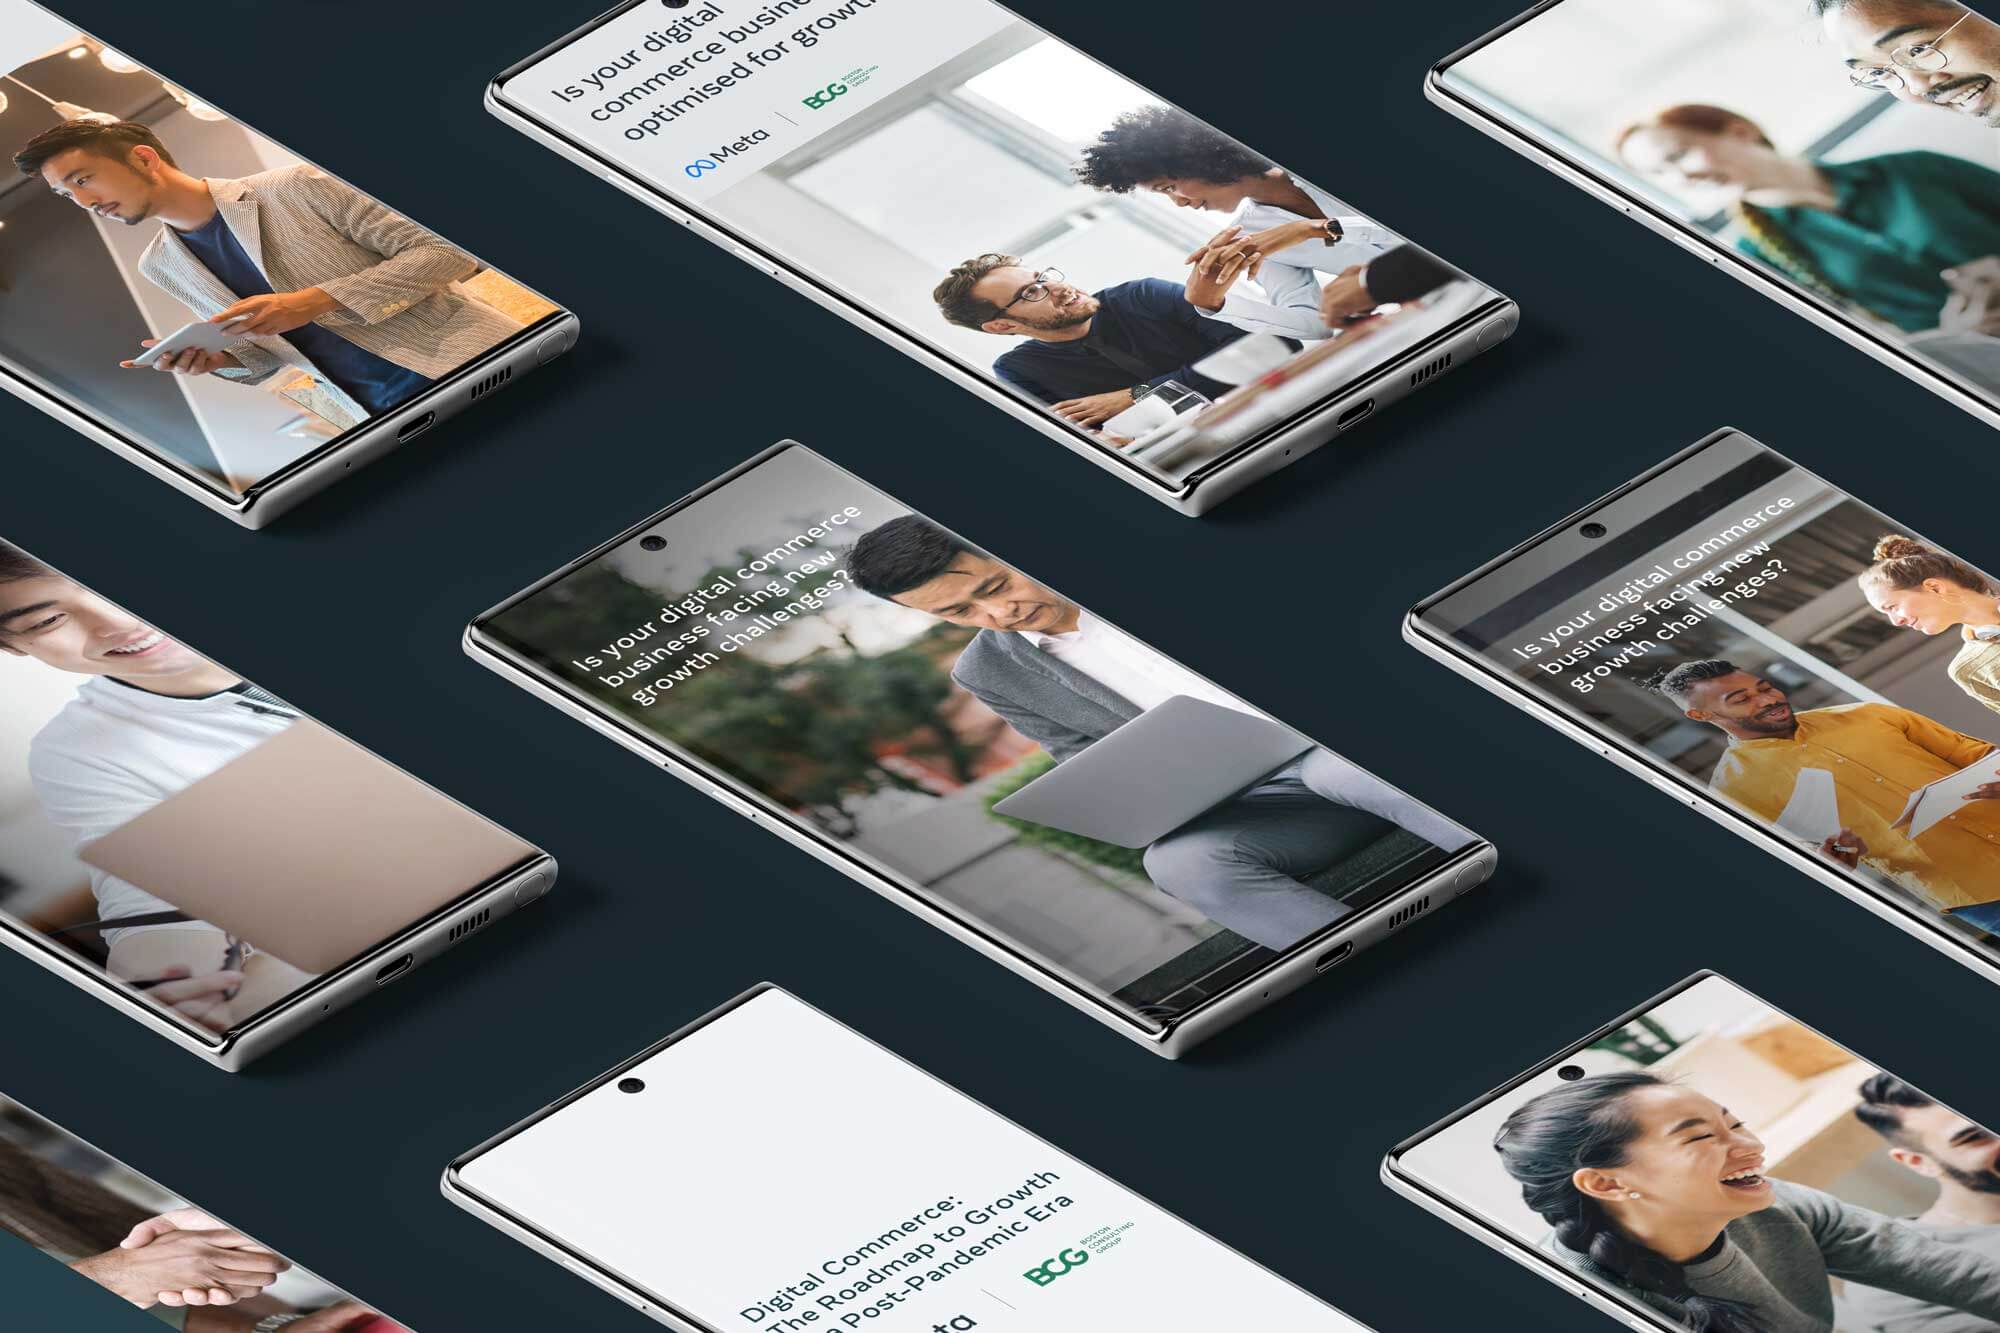 Meta x BCG | Digital Commerce: The Roadmap to Growth in a Post-Pandemic Era advertisements and Instagram stories visualised on multiple mobile devices